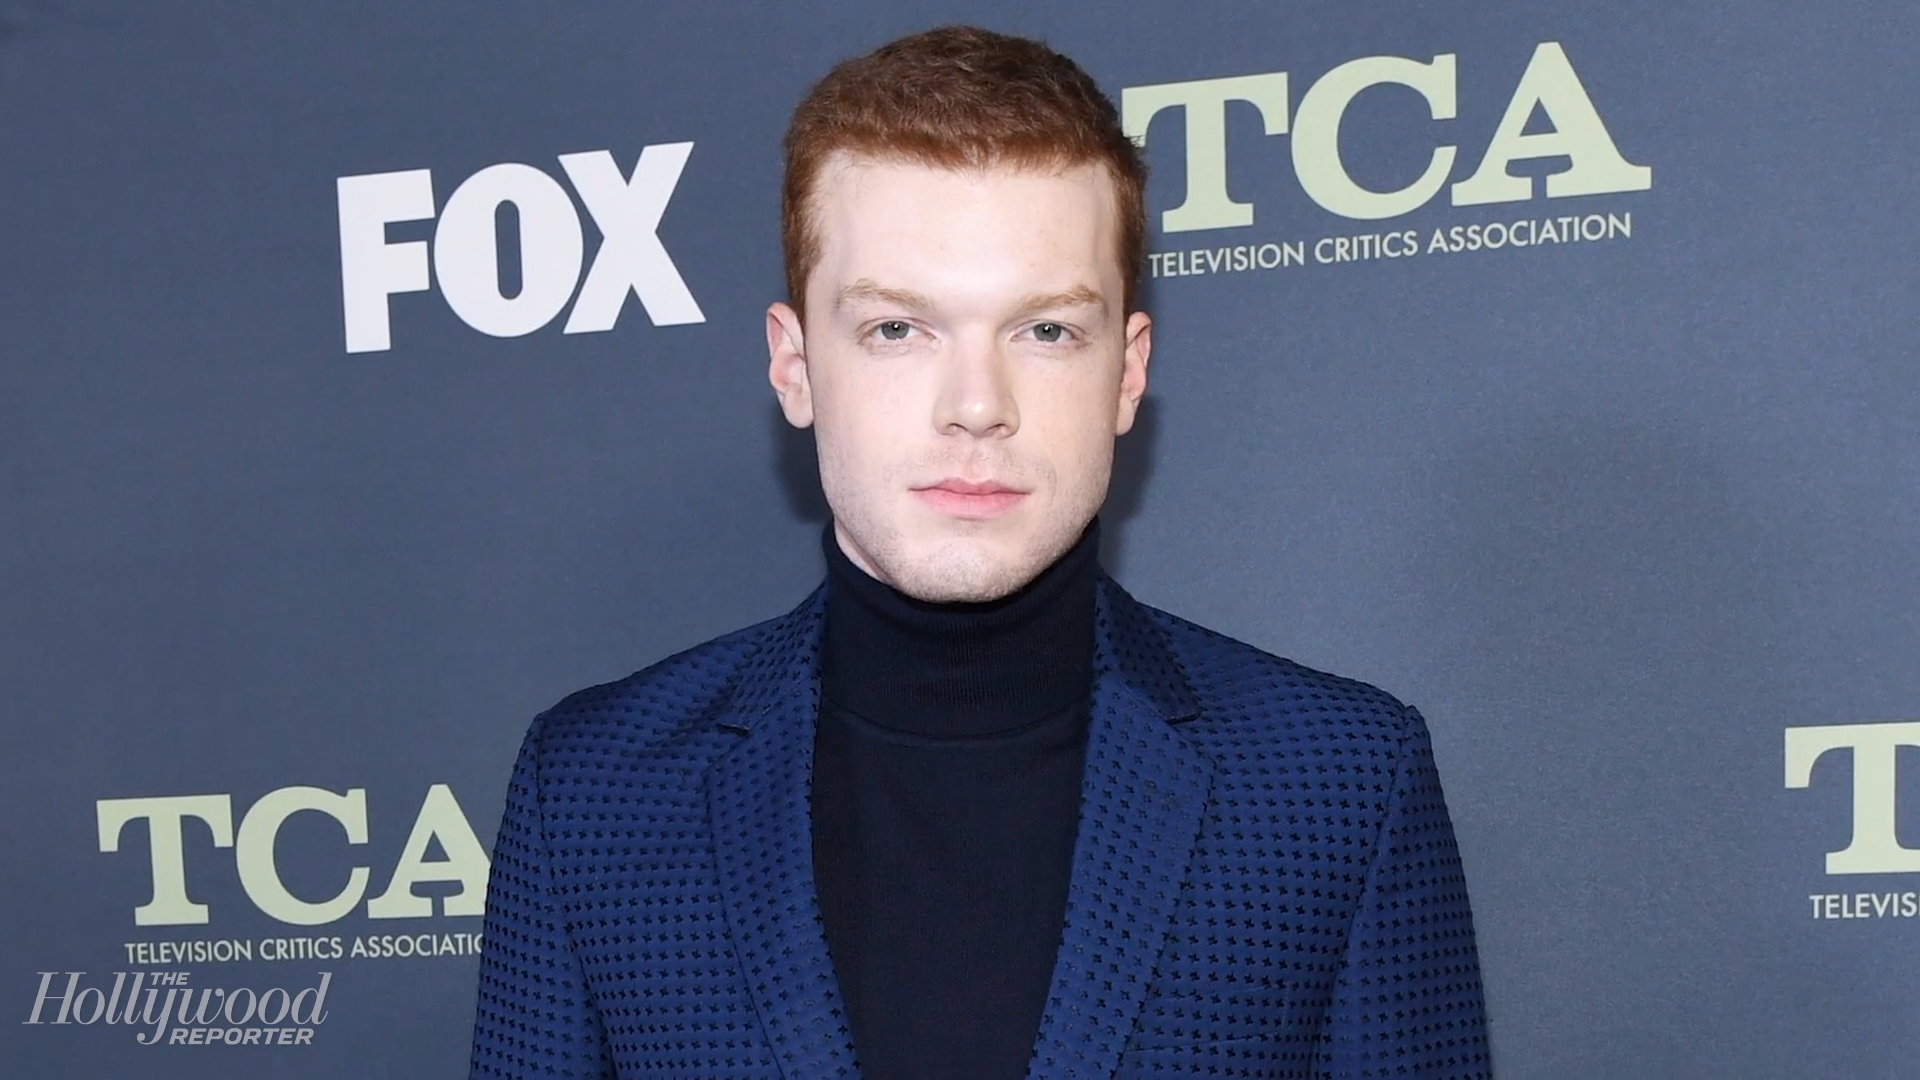 Shameless': Why Cameron Monaghan Left and Returned So Soon